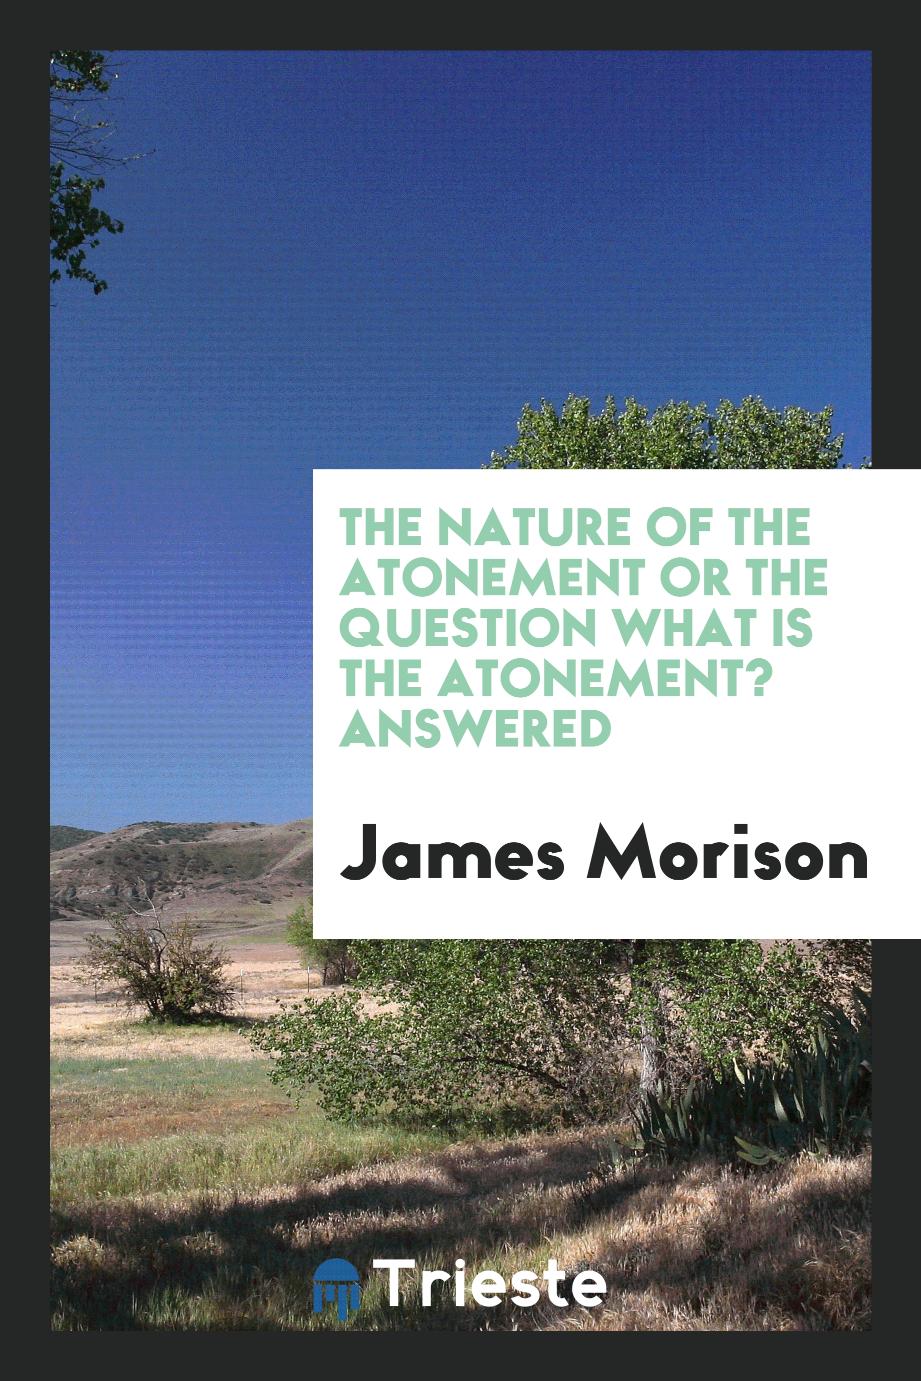 The Nature of the Atonement or the Question What Is the Atonement? Answered